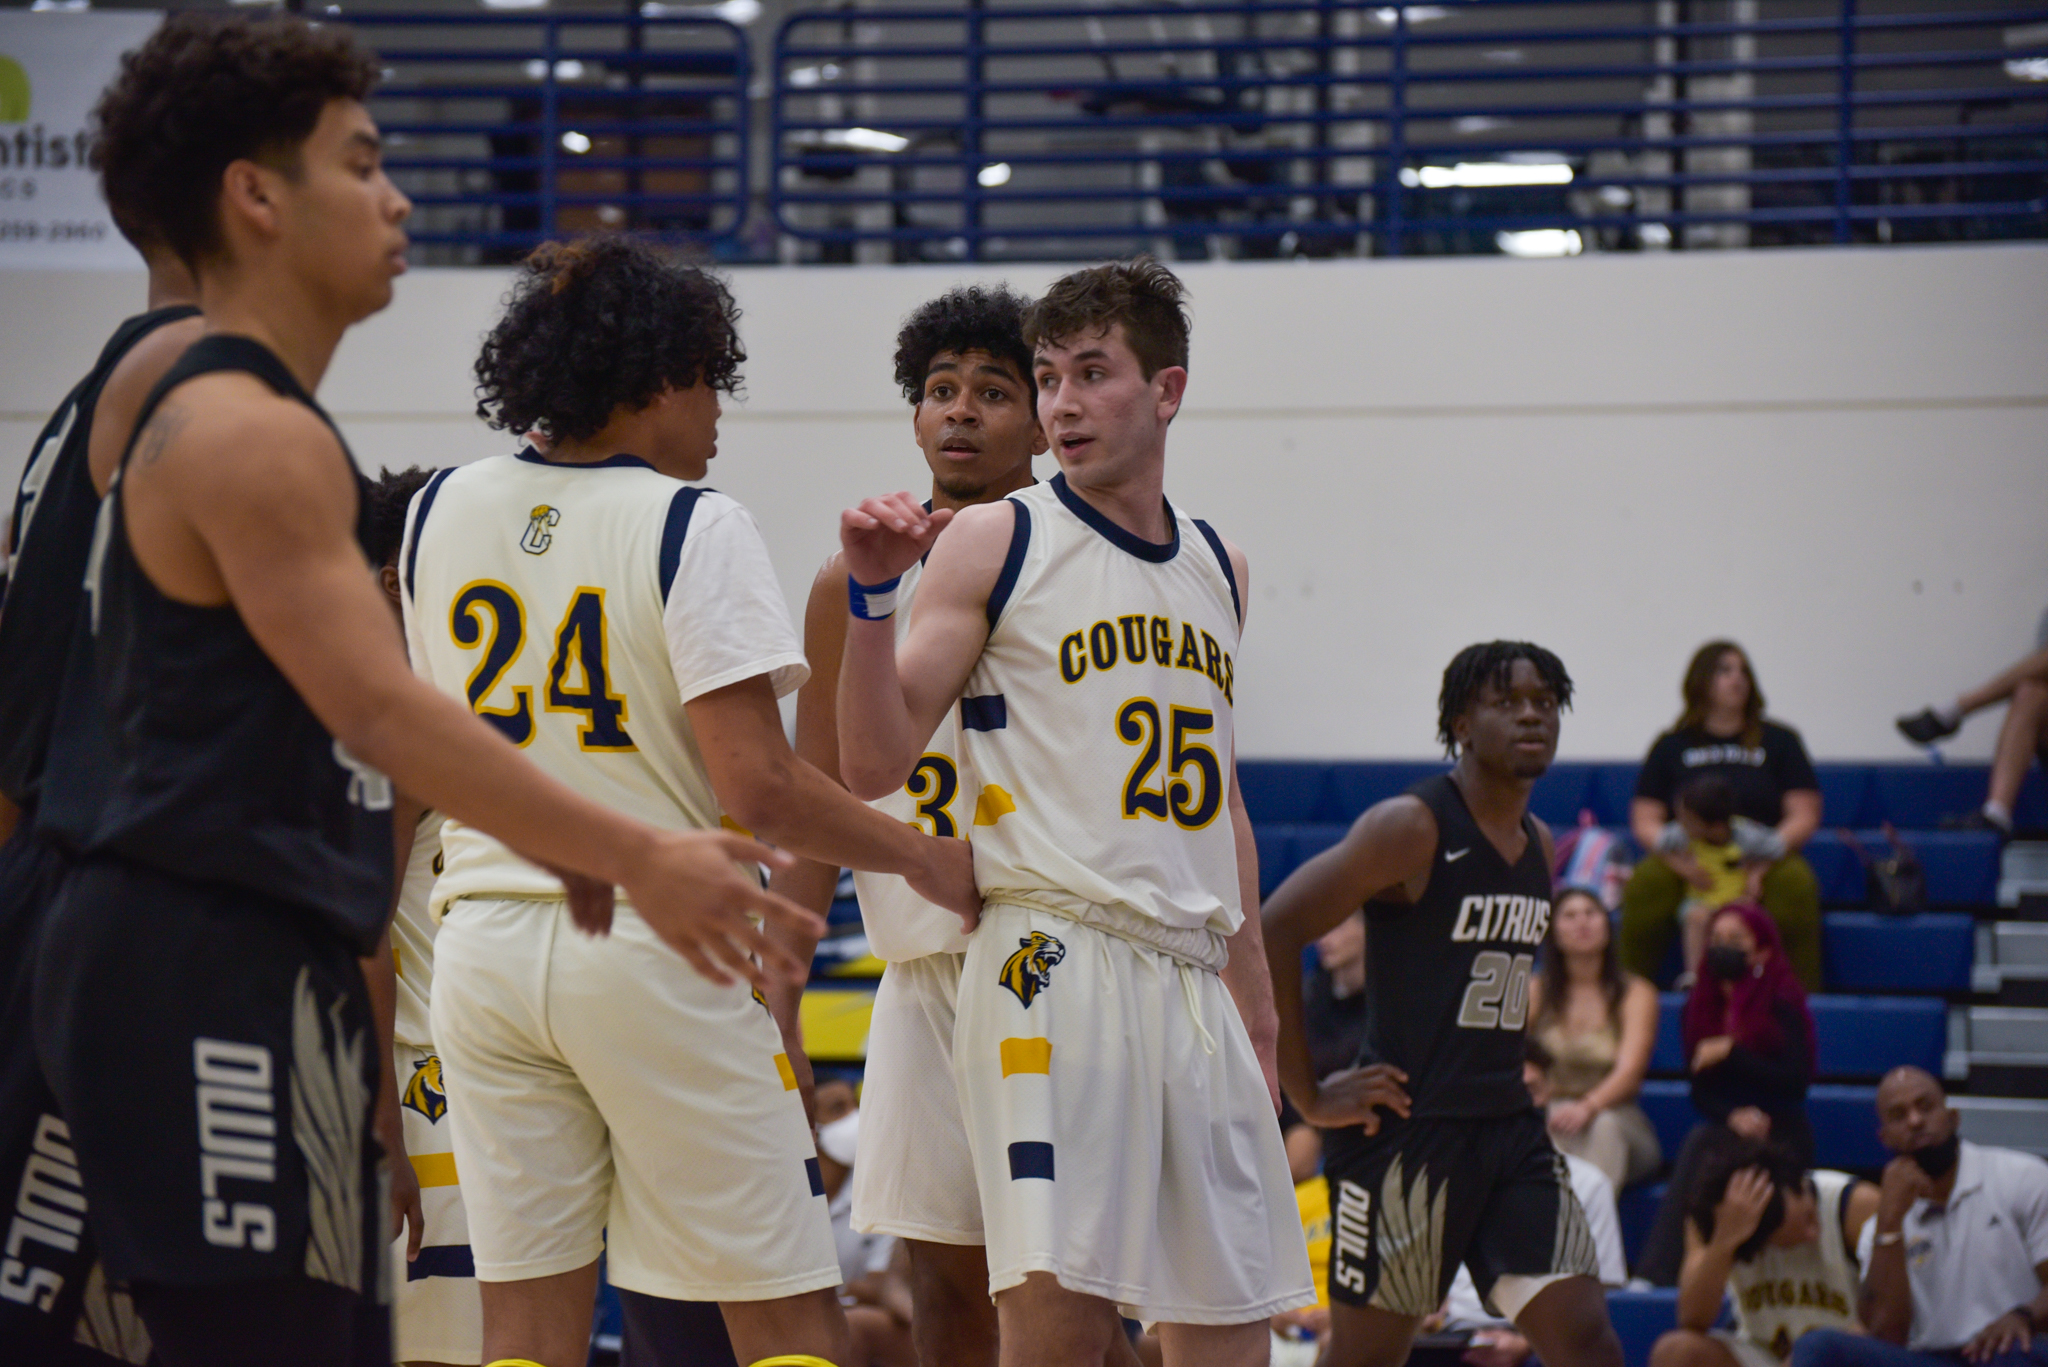 College of the Canyons men's basketball vs. Citrus College on Feb. 12, 2022.